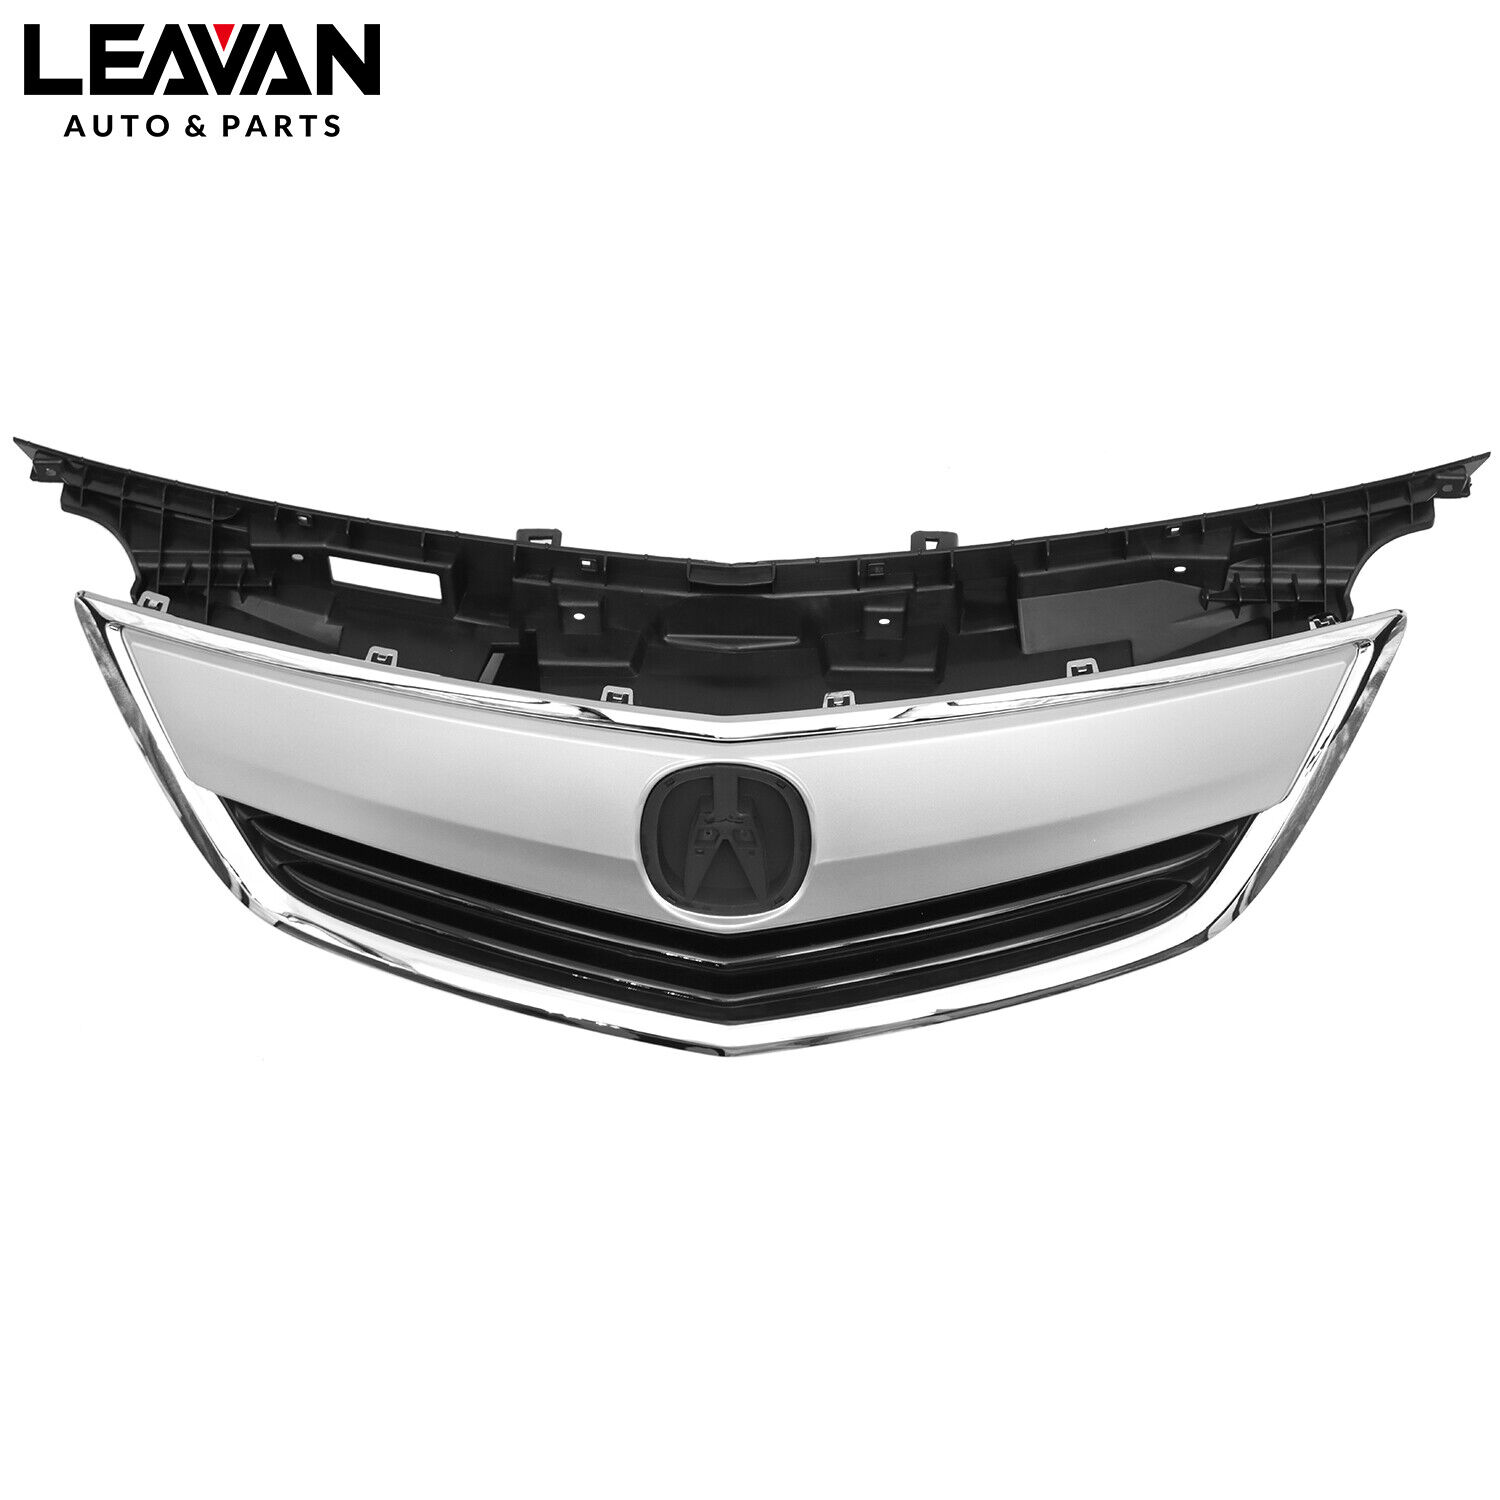 Front Bumper Upper Grille For Acura TL 2012 2013 2014 Chrome Finished W/Moulding